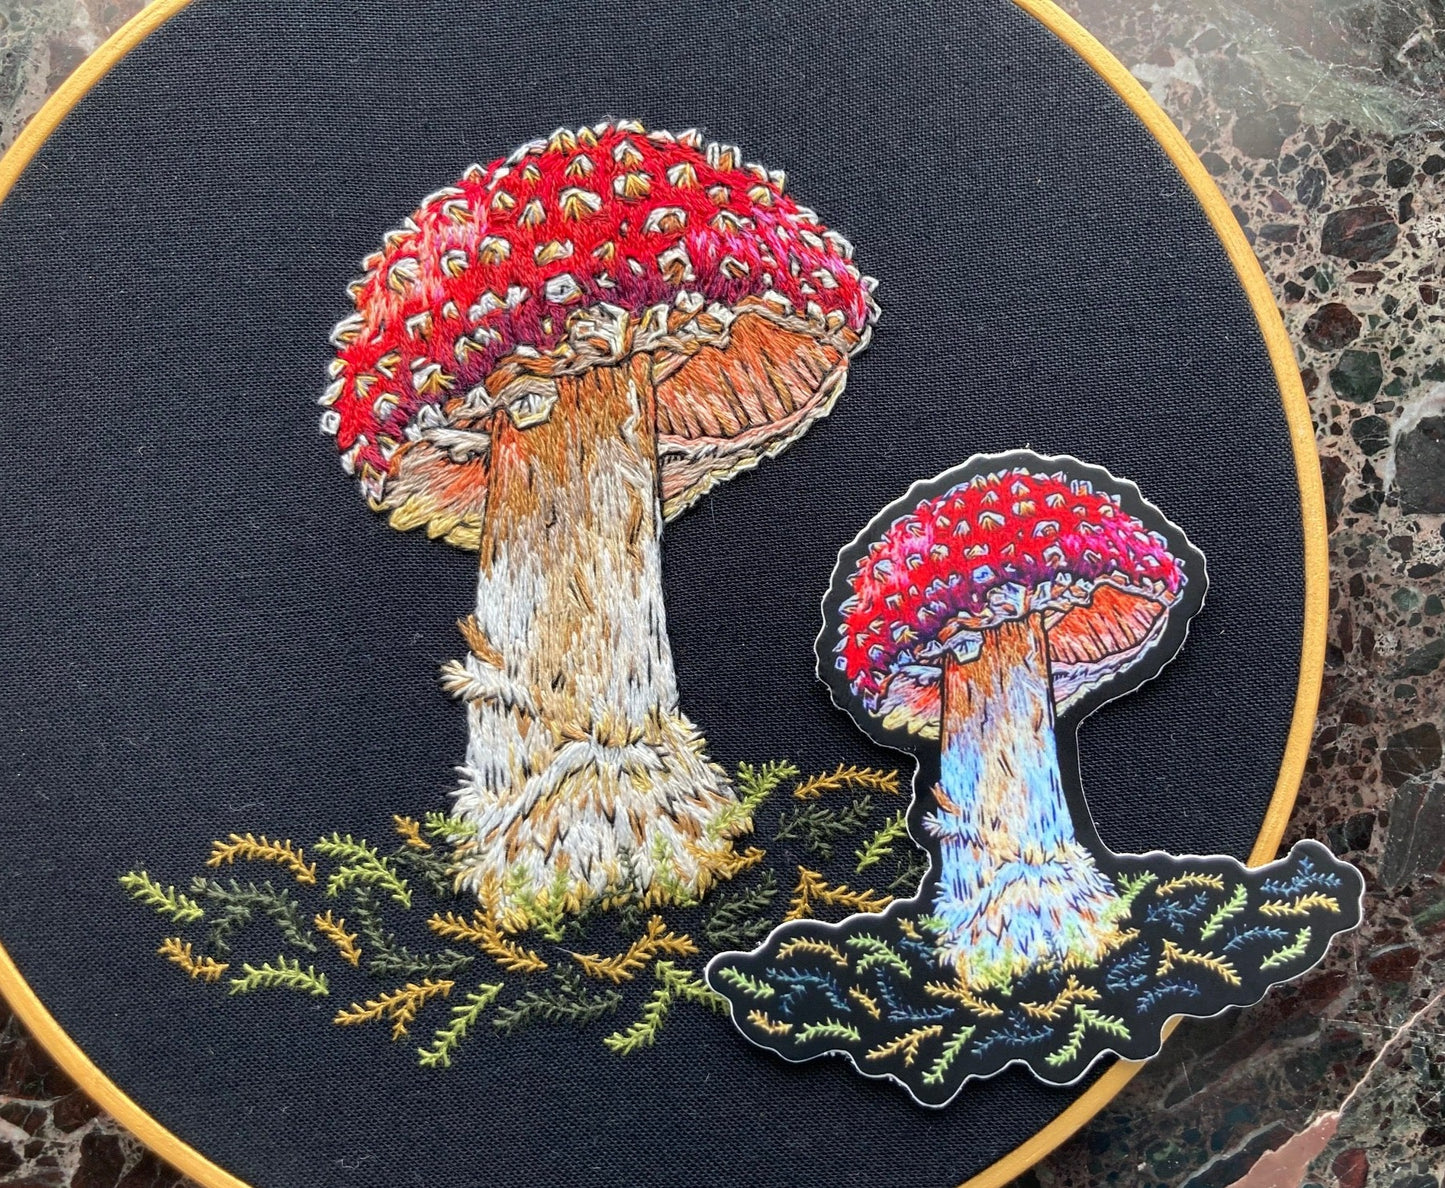 A sticker depicting a brightly colored embroidered amanita mushroom sits on the original embroidery of the same Amanita Mushroom. 